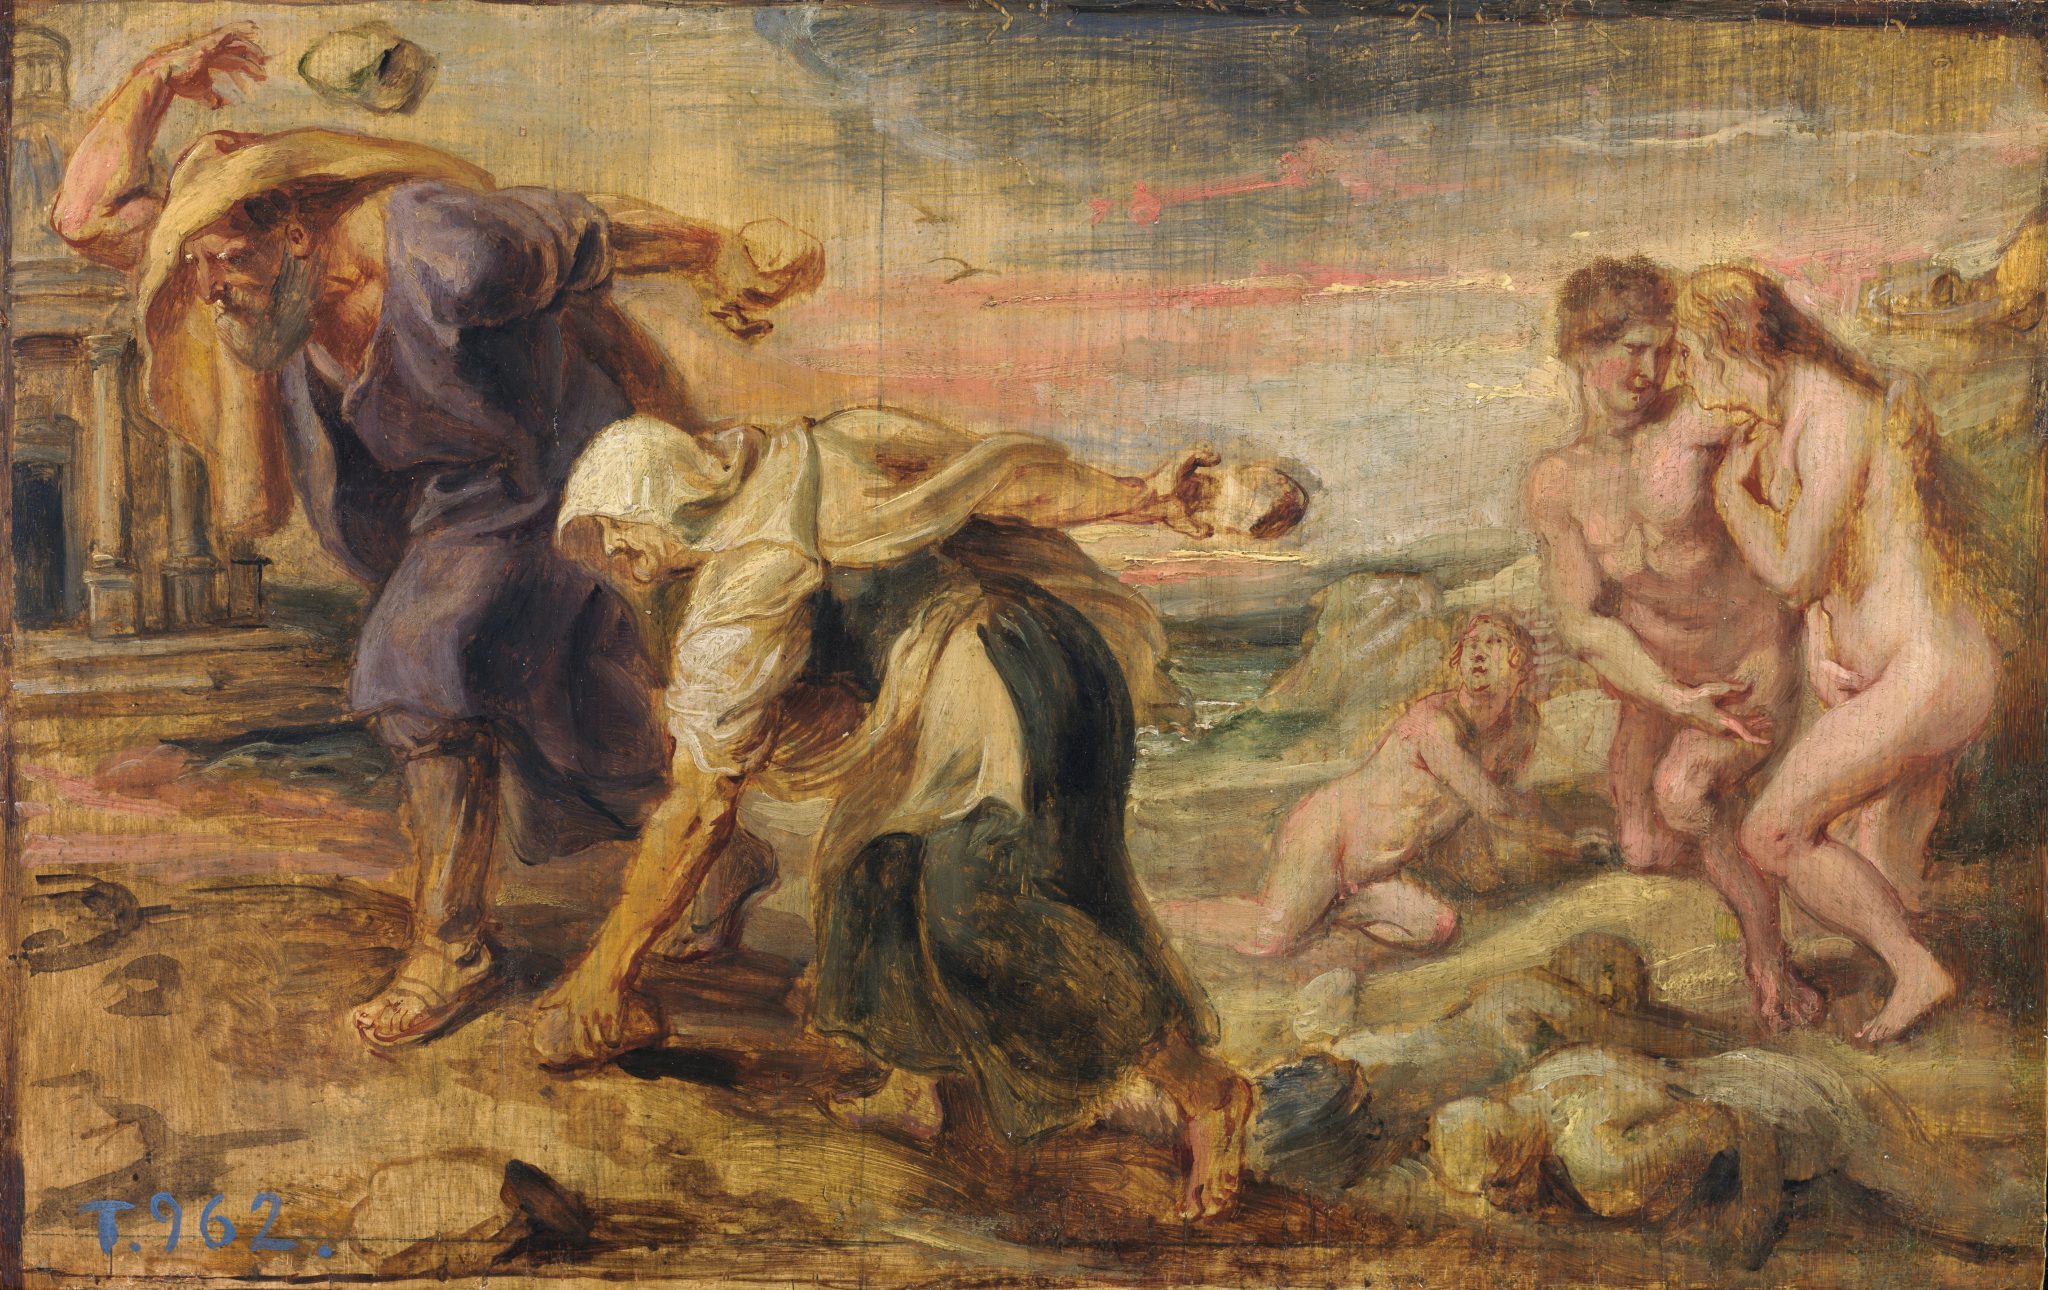 Lost In The Cloud Ch 62 Matter as an Artist: Rubens's Myths of Spontaneous Generation - Journal of  Historians of Netherlandish Art